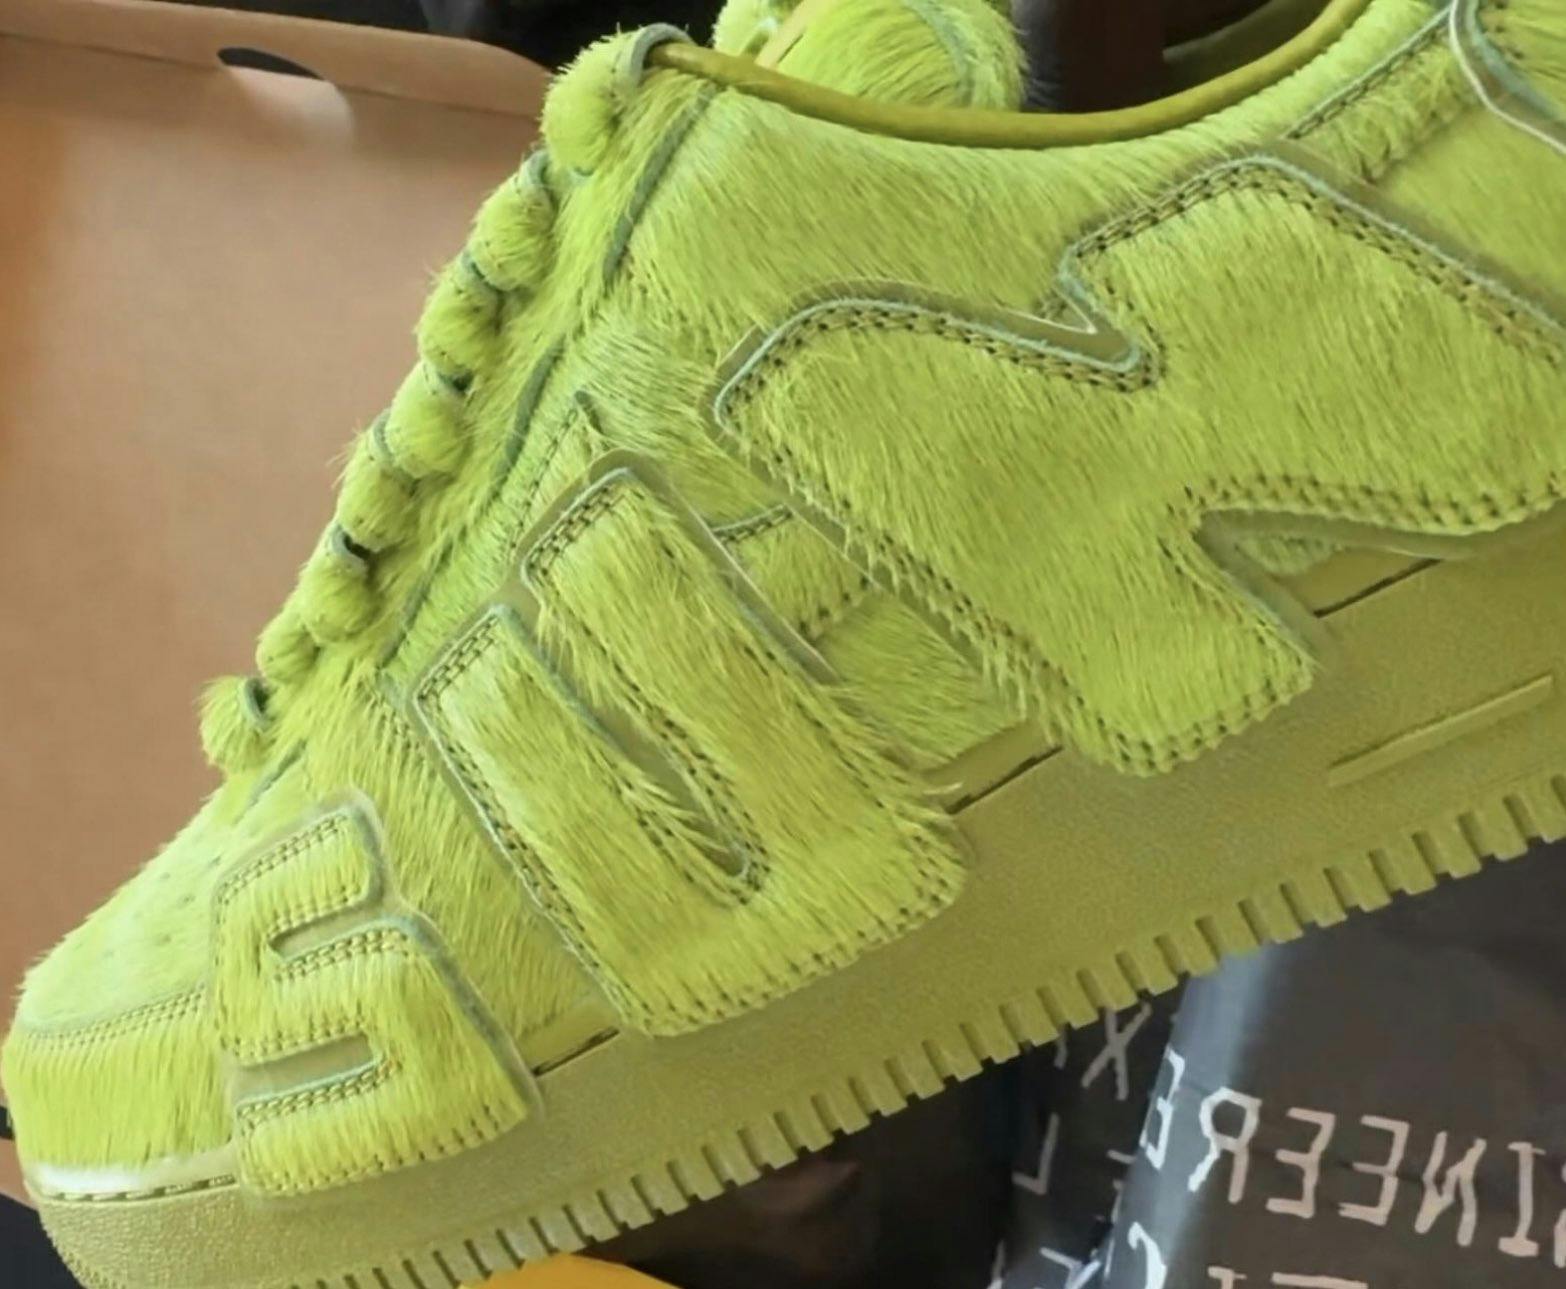 Lil Yachty showing off all 1 of 1 CPFM AF1 F&F